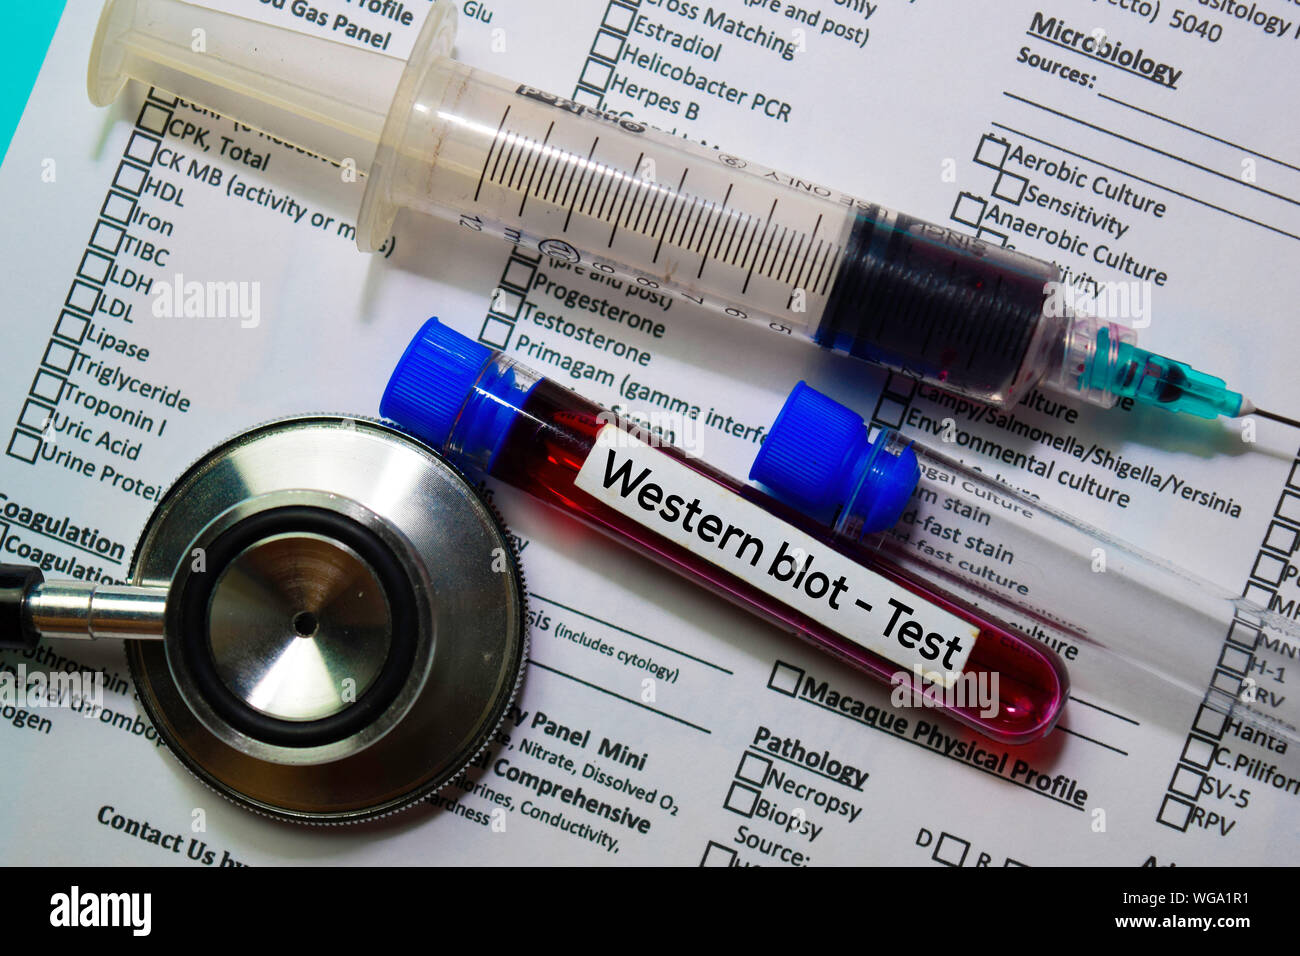 Western blot - Test with blood sample. Top view isolated on office desk.  Healthcare/Medical concept Stock Photo - Alamy